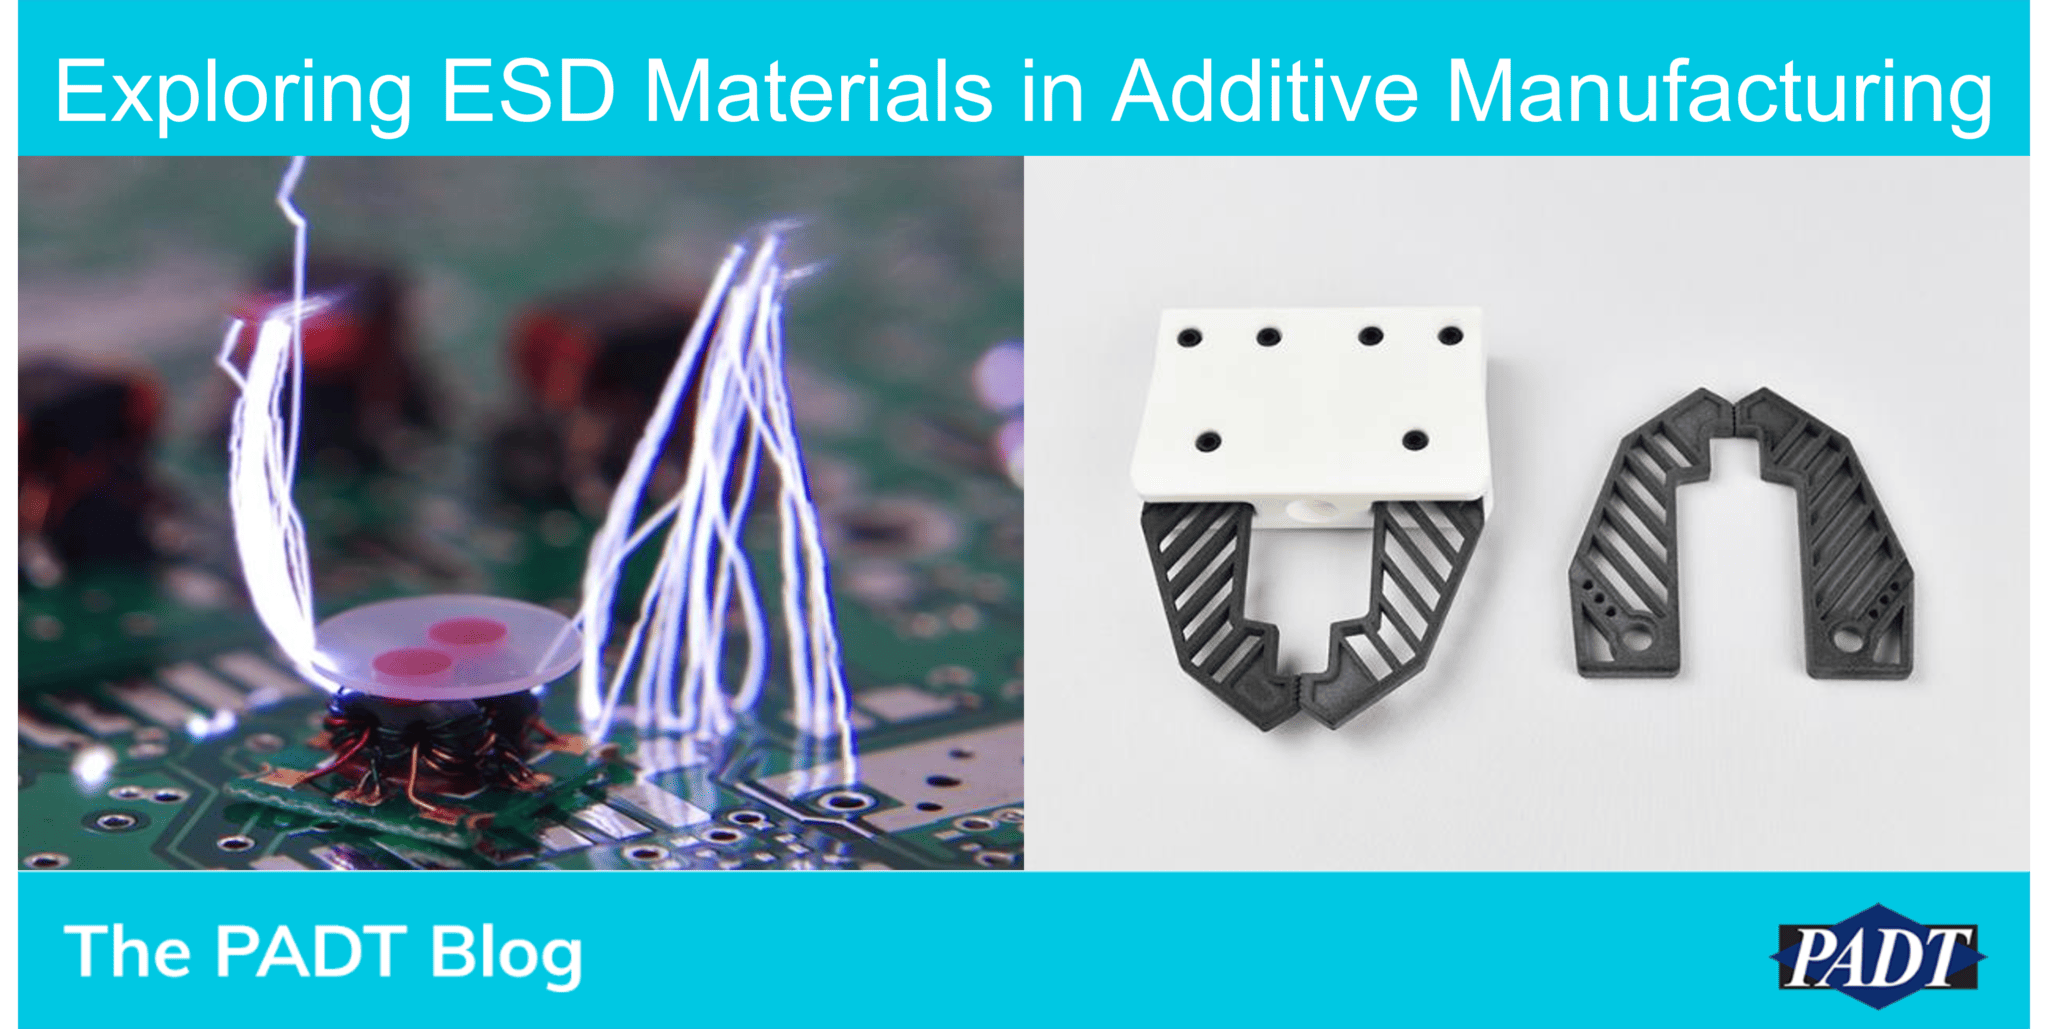 ESD Materials in Additive Manufacturing